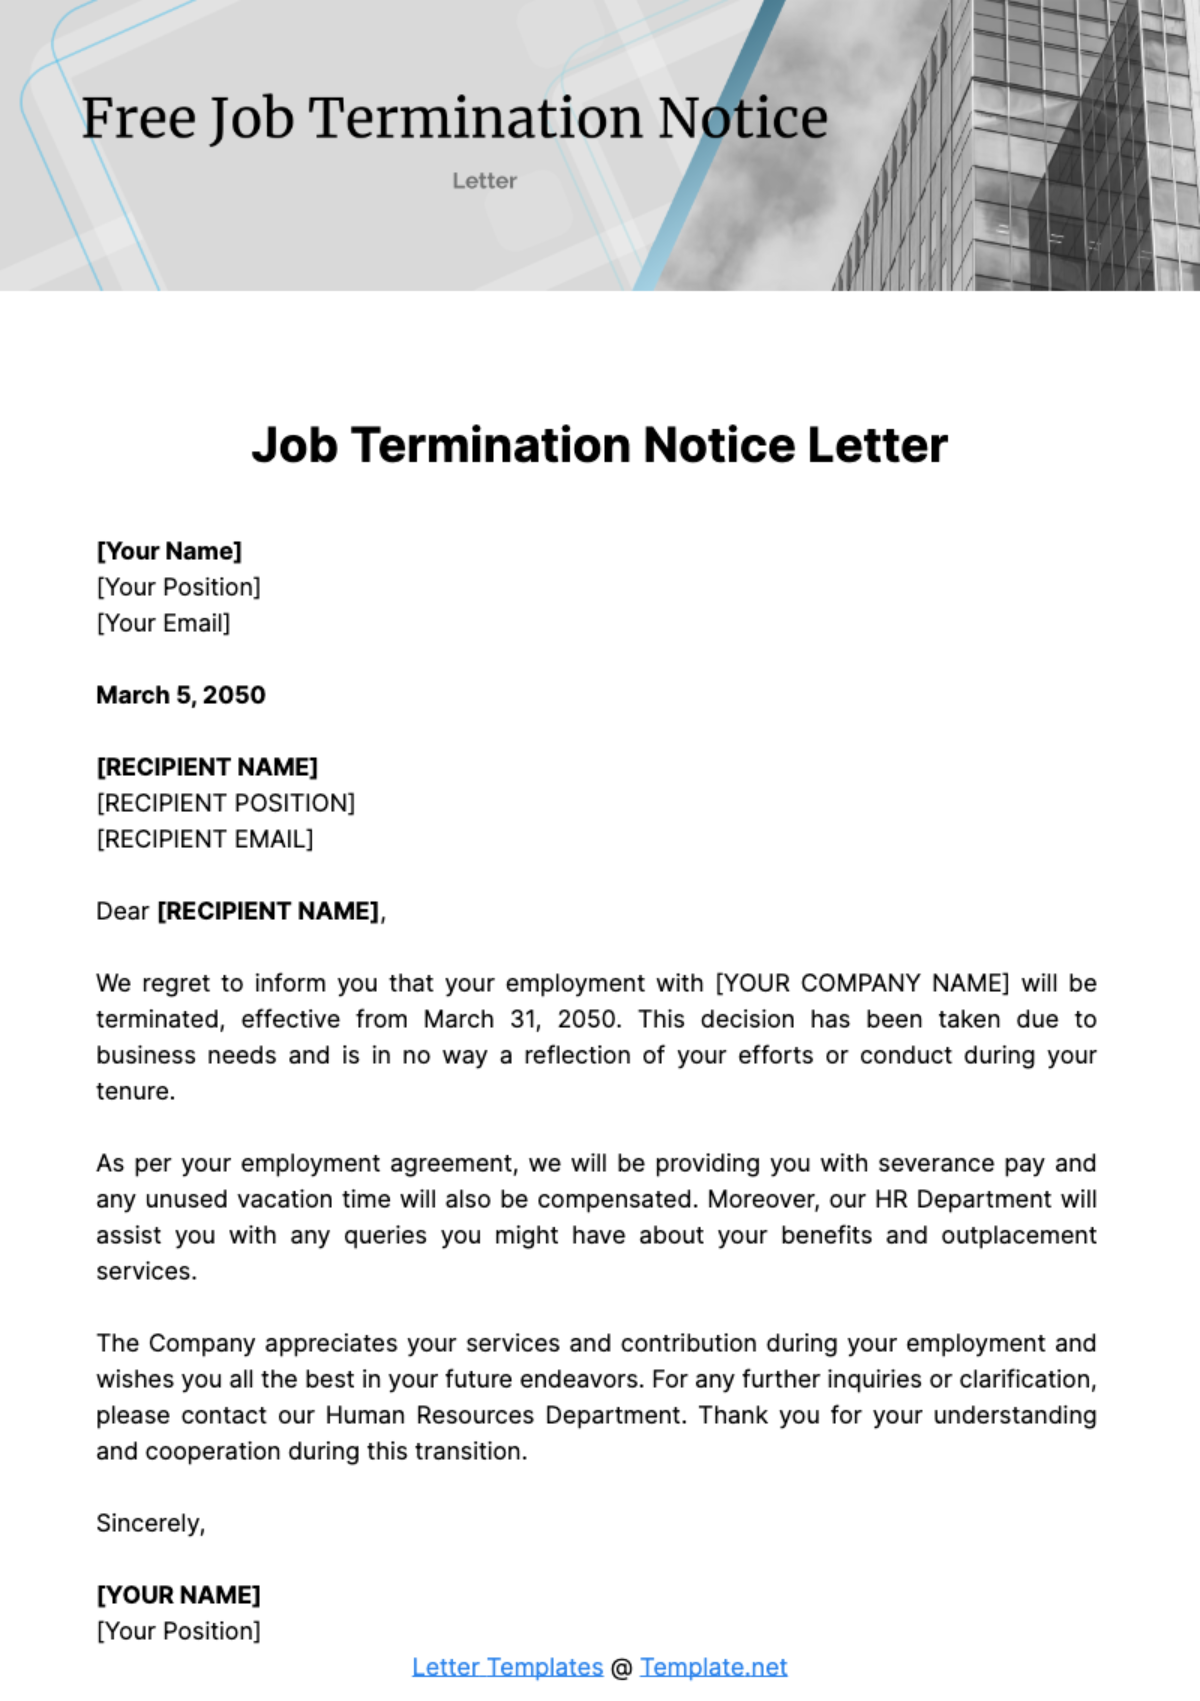 Free Job Termination Notice Letter Template